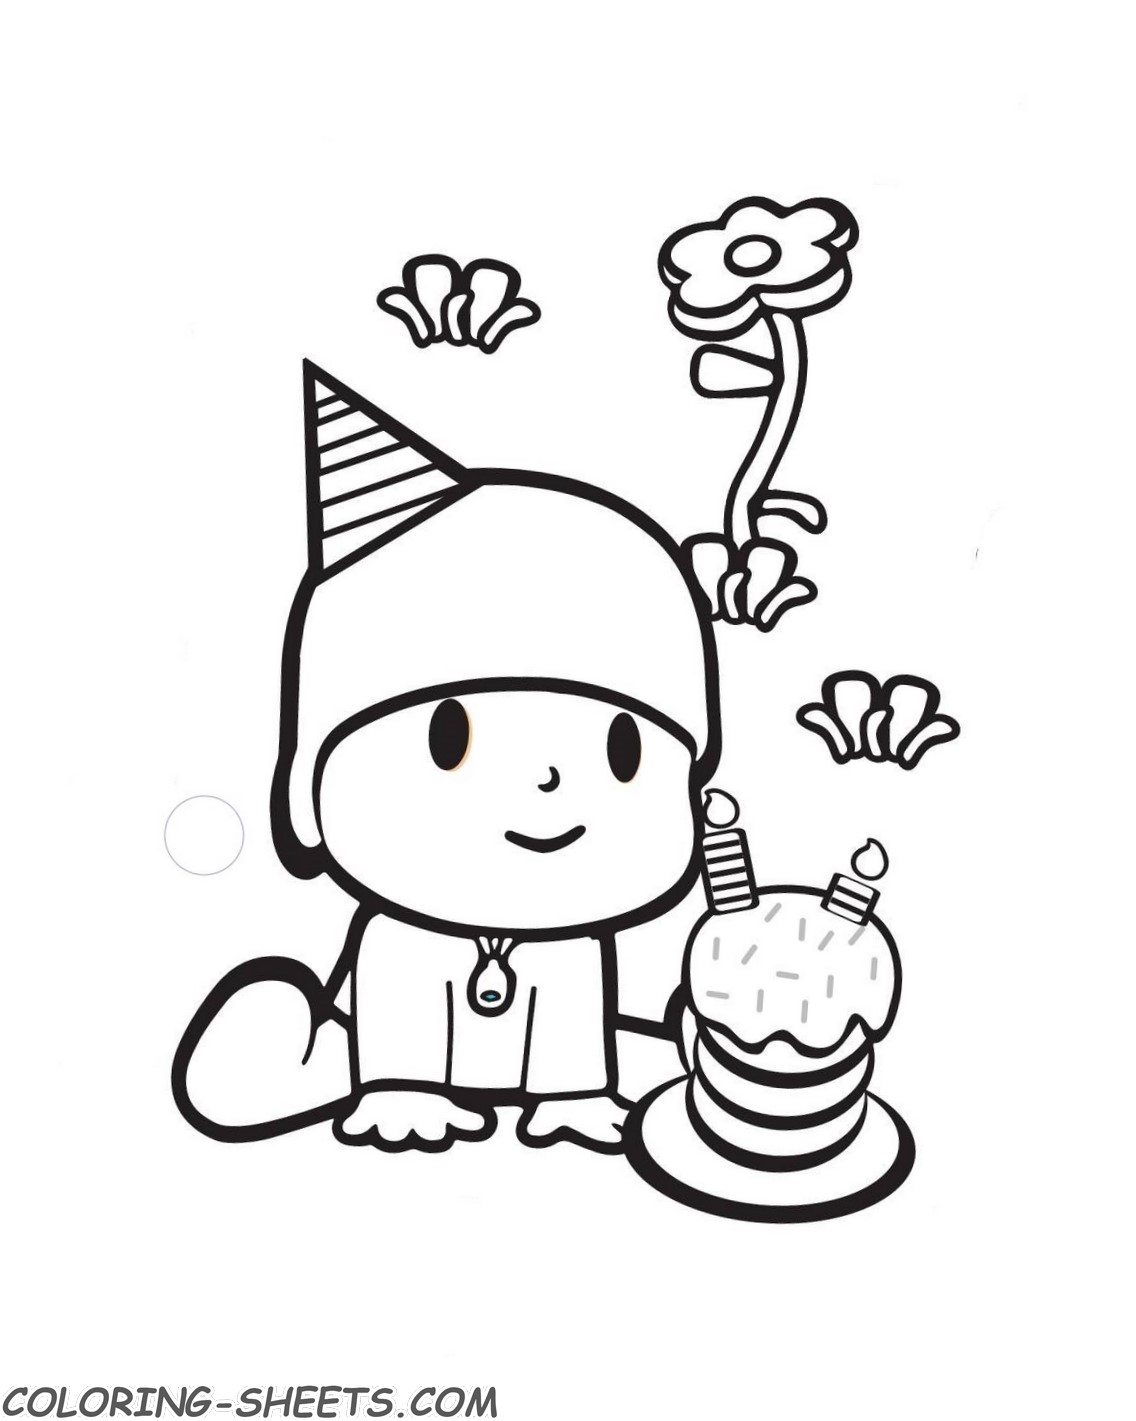 Pocoyo coloring pages printable pictures high quality